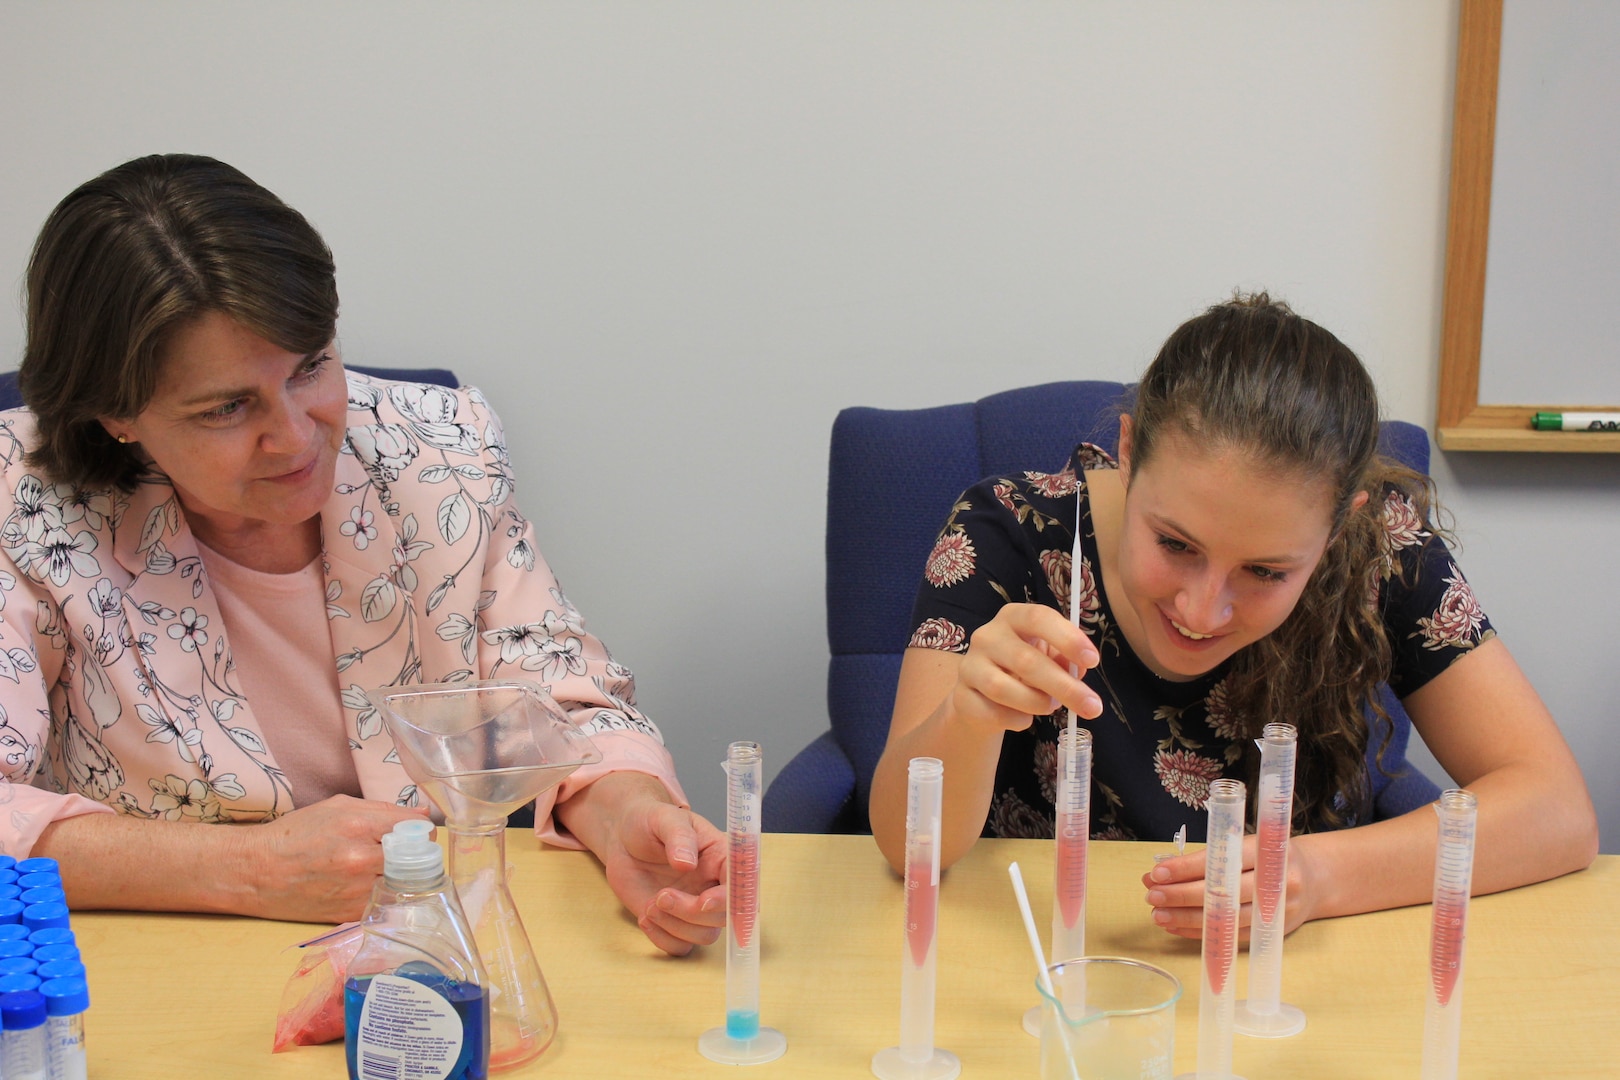 IMAGE: Dr. Rose Hayden (right) works with Hannah Swirzinski (left), an intern from Ocean Lakes High School in Virginia Beach in 2018. Swirzinski is one of the many interns Hayden has worked with during her time at NSWCDD. “My greatest satisfaction is to see young people that I have mentored succeed at work,” said Hayden. Hayden is the recipient of the NSWCDD Employee Development Award and is one of 90 individuals and 39 teams to be honored in a special video awards ceremony, to be released on the command’s YouTube page later this month.